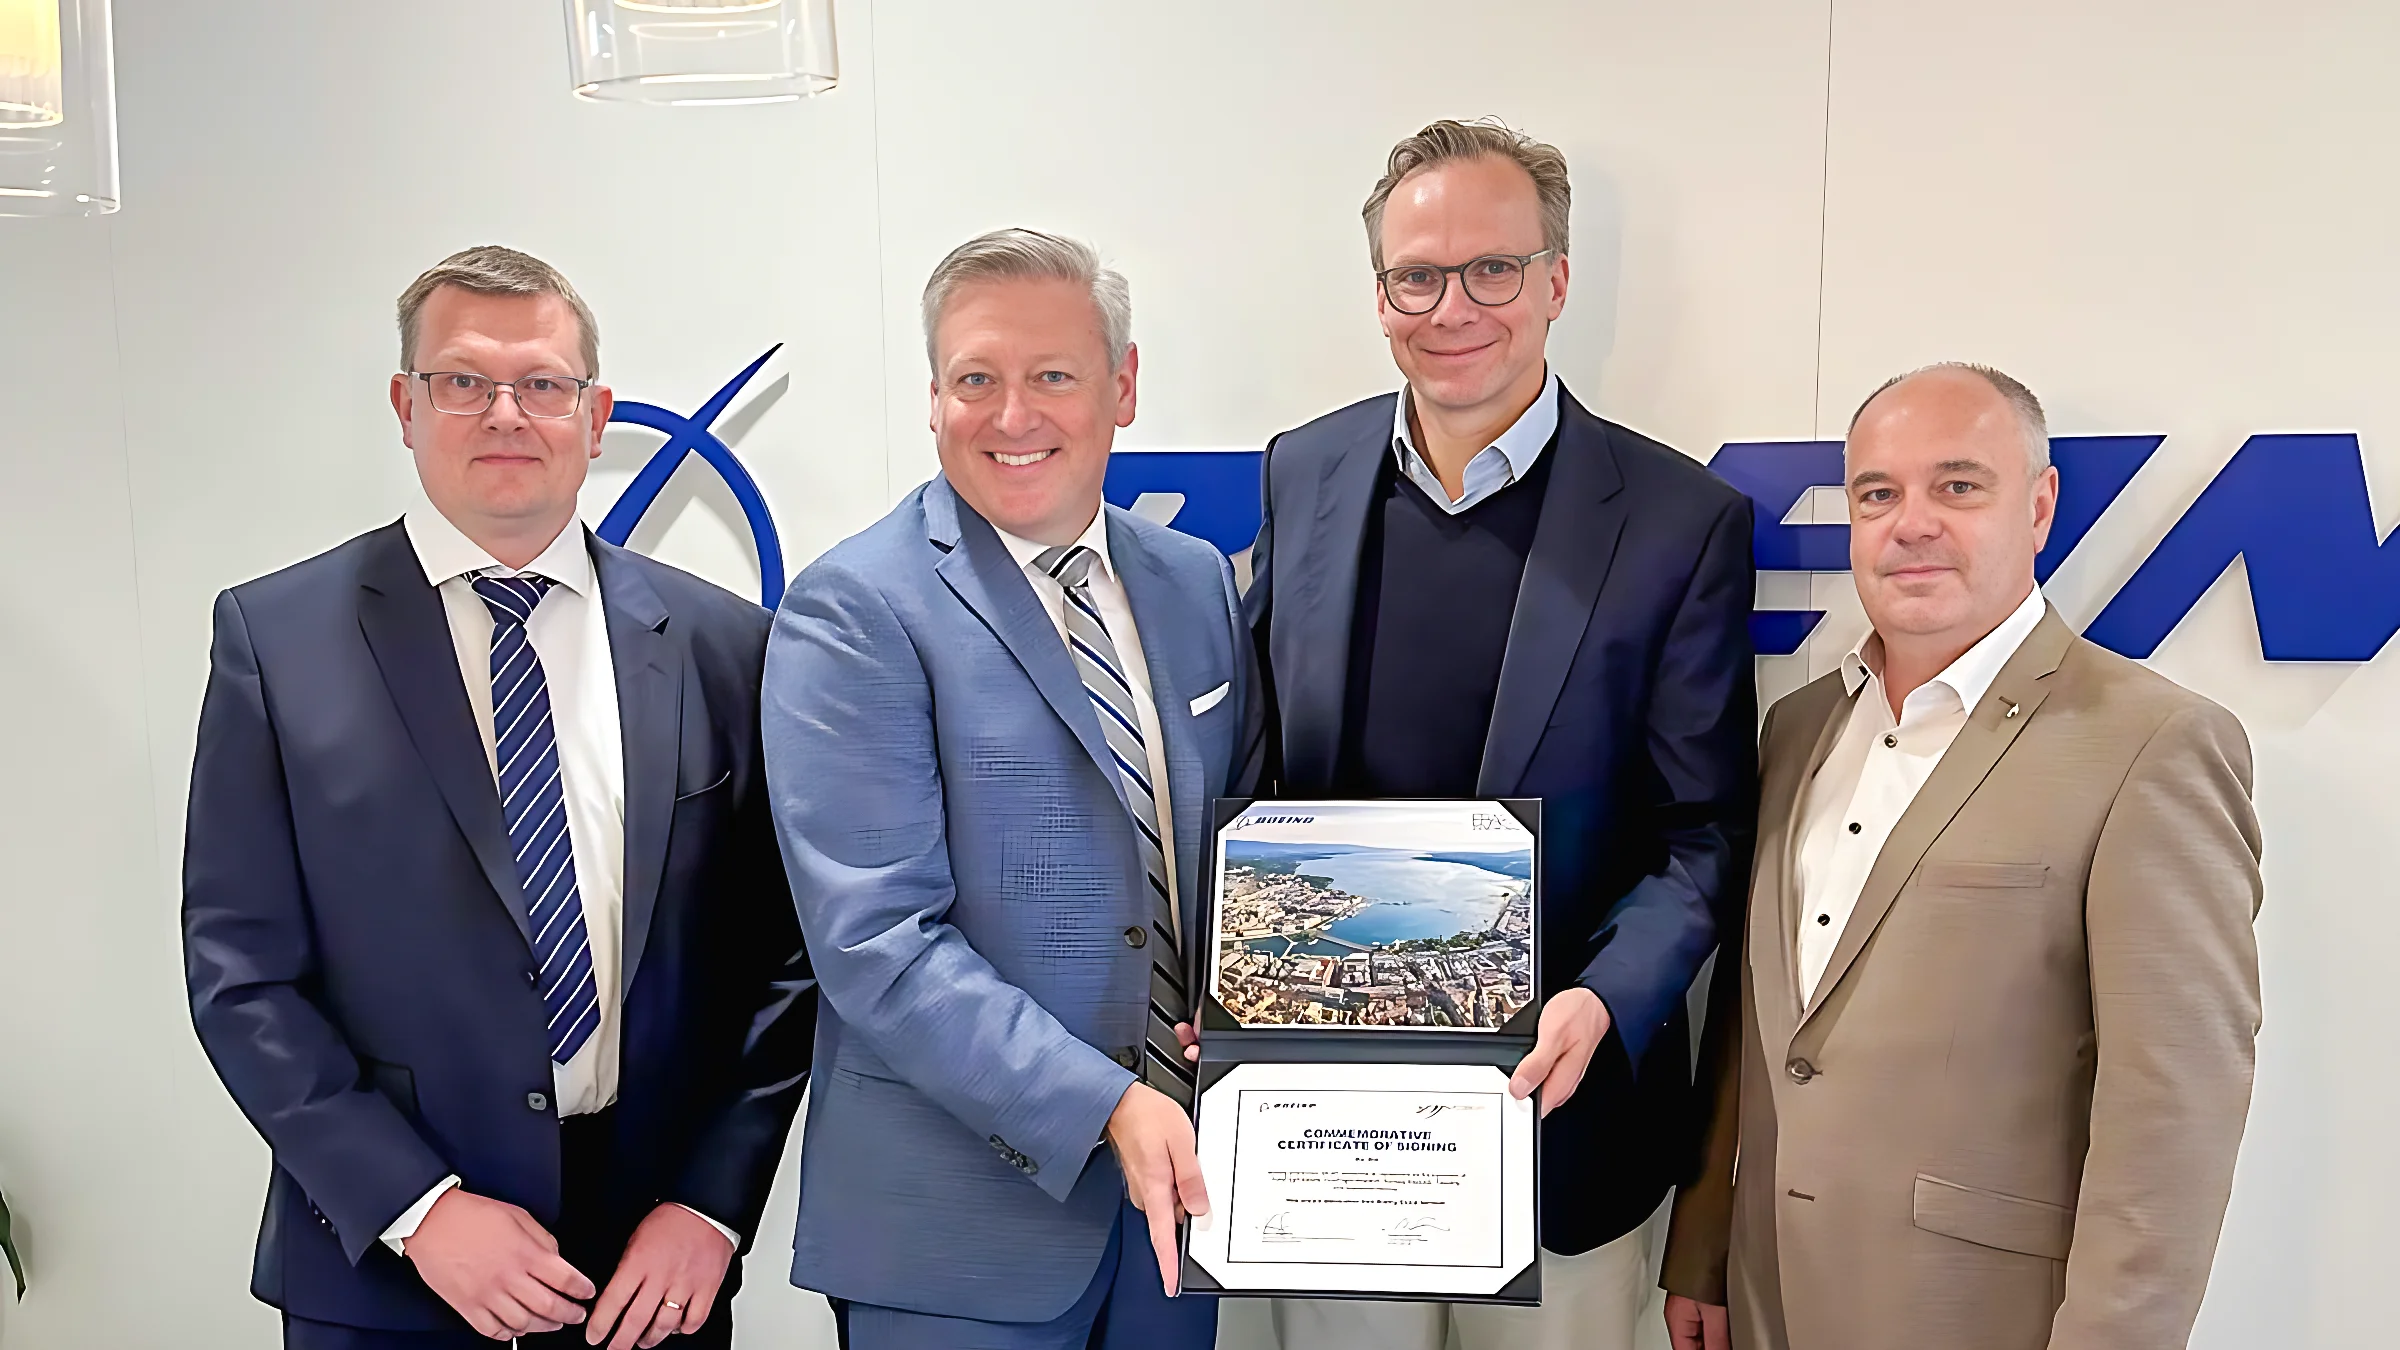 From left to right, Kim Lantz (Head of Flight Planning Solutions at ForeFlight), Kevin Sutterfield (Chief Revenue Officer of ForeFlight), Andreas Bierwirth (CEO of AvconJet), and Christian Hrauda (Accountable Manager of AvconJet) stand together holding a commemorative certificate of joining. The certificate, featuring the Boeing logo and a scenic aerial photograph, signifies a significant partnership. The backdrop displays the ForeFlight logo.